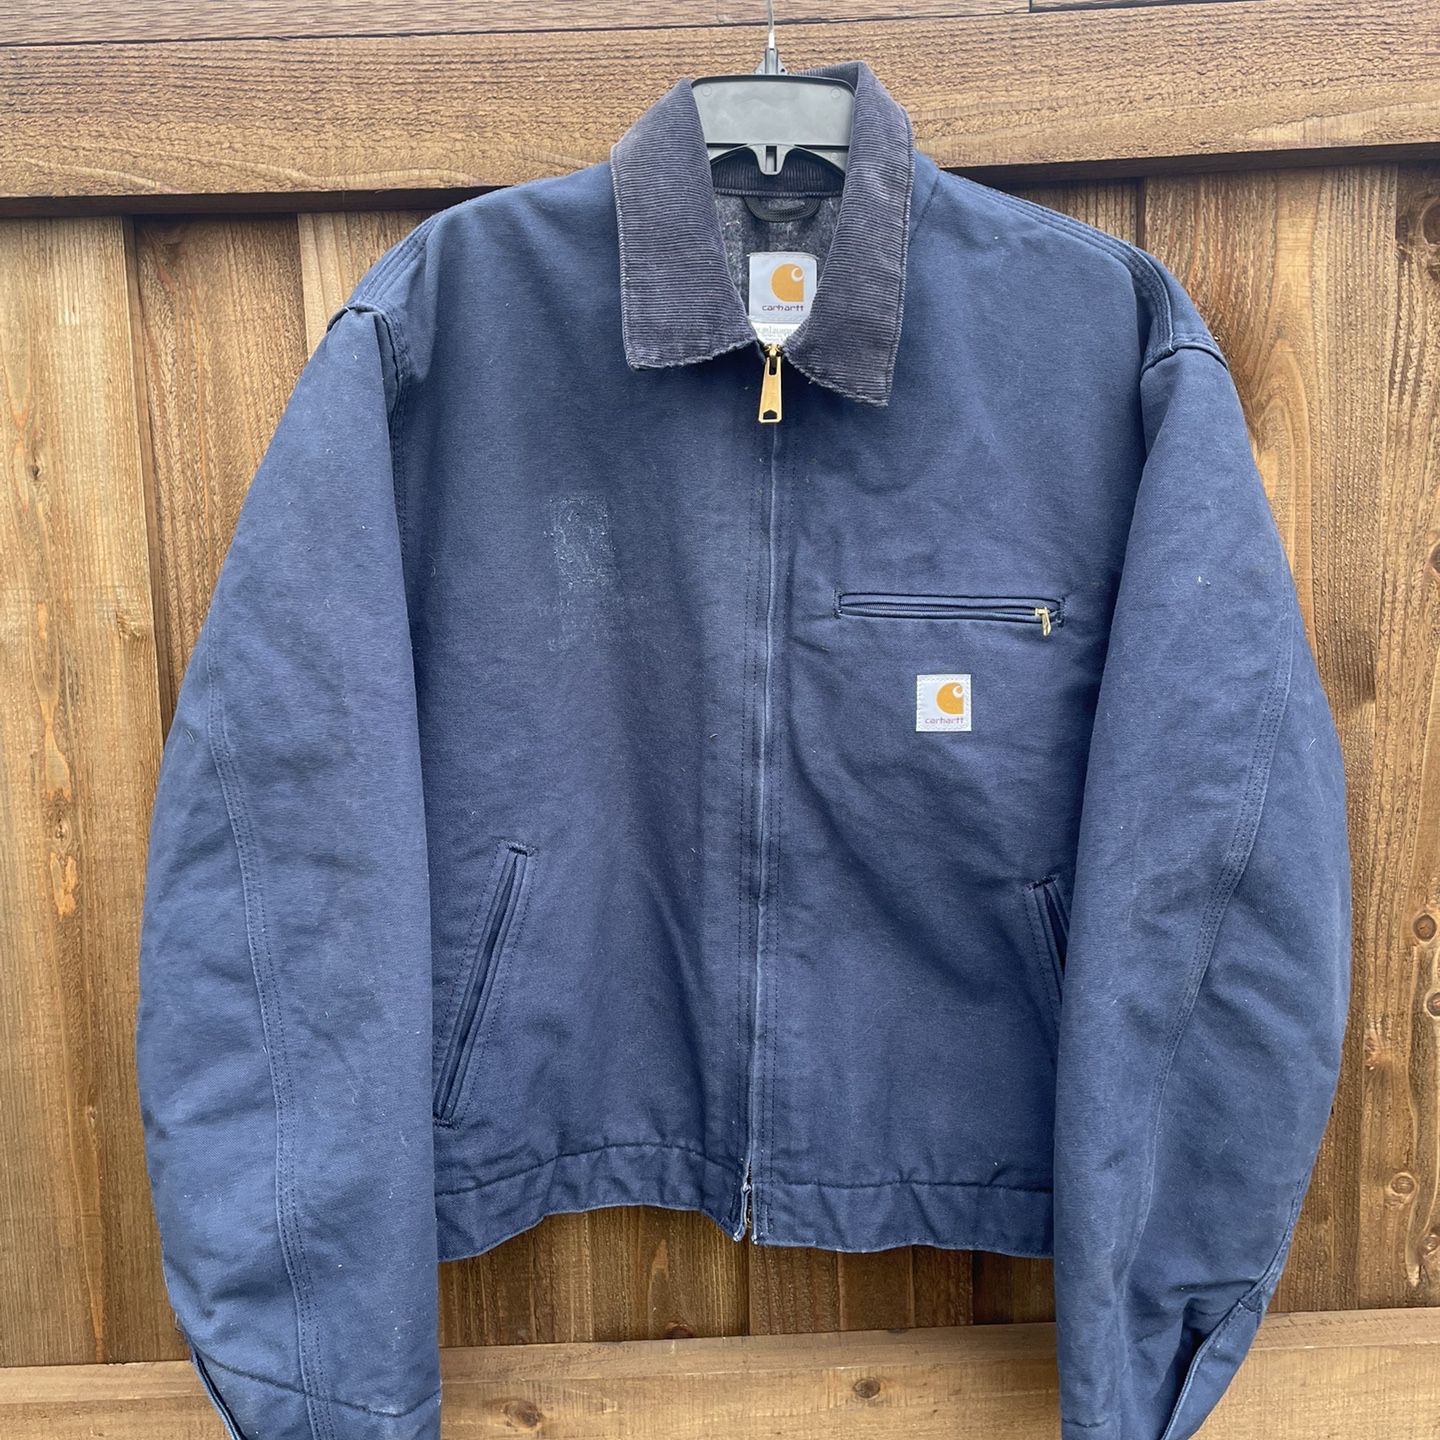 Union Made Carhartt Detroit Jacket for Sale in Garland, TX - OfferUp